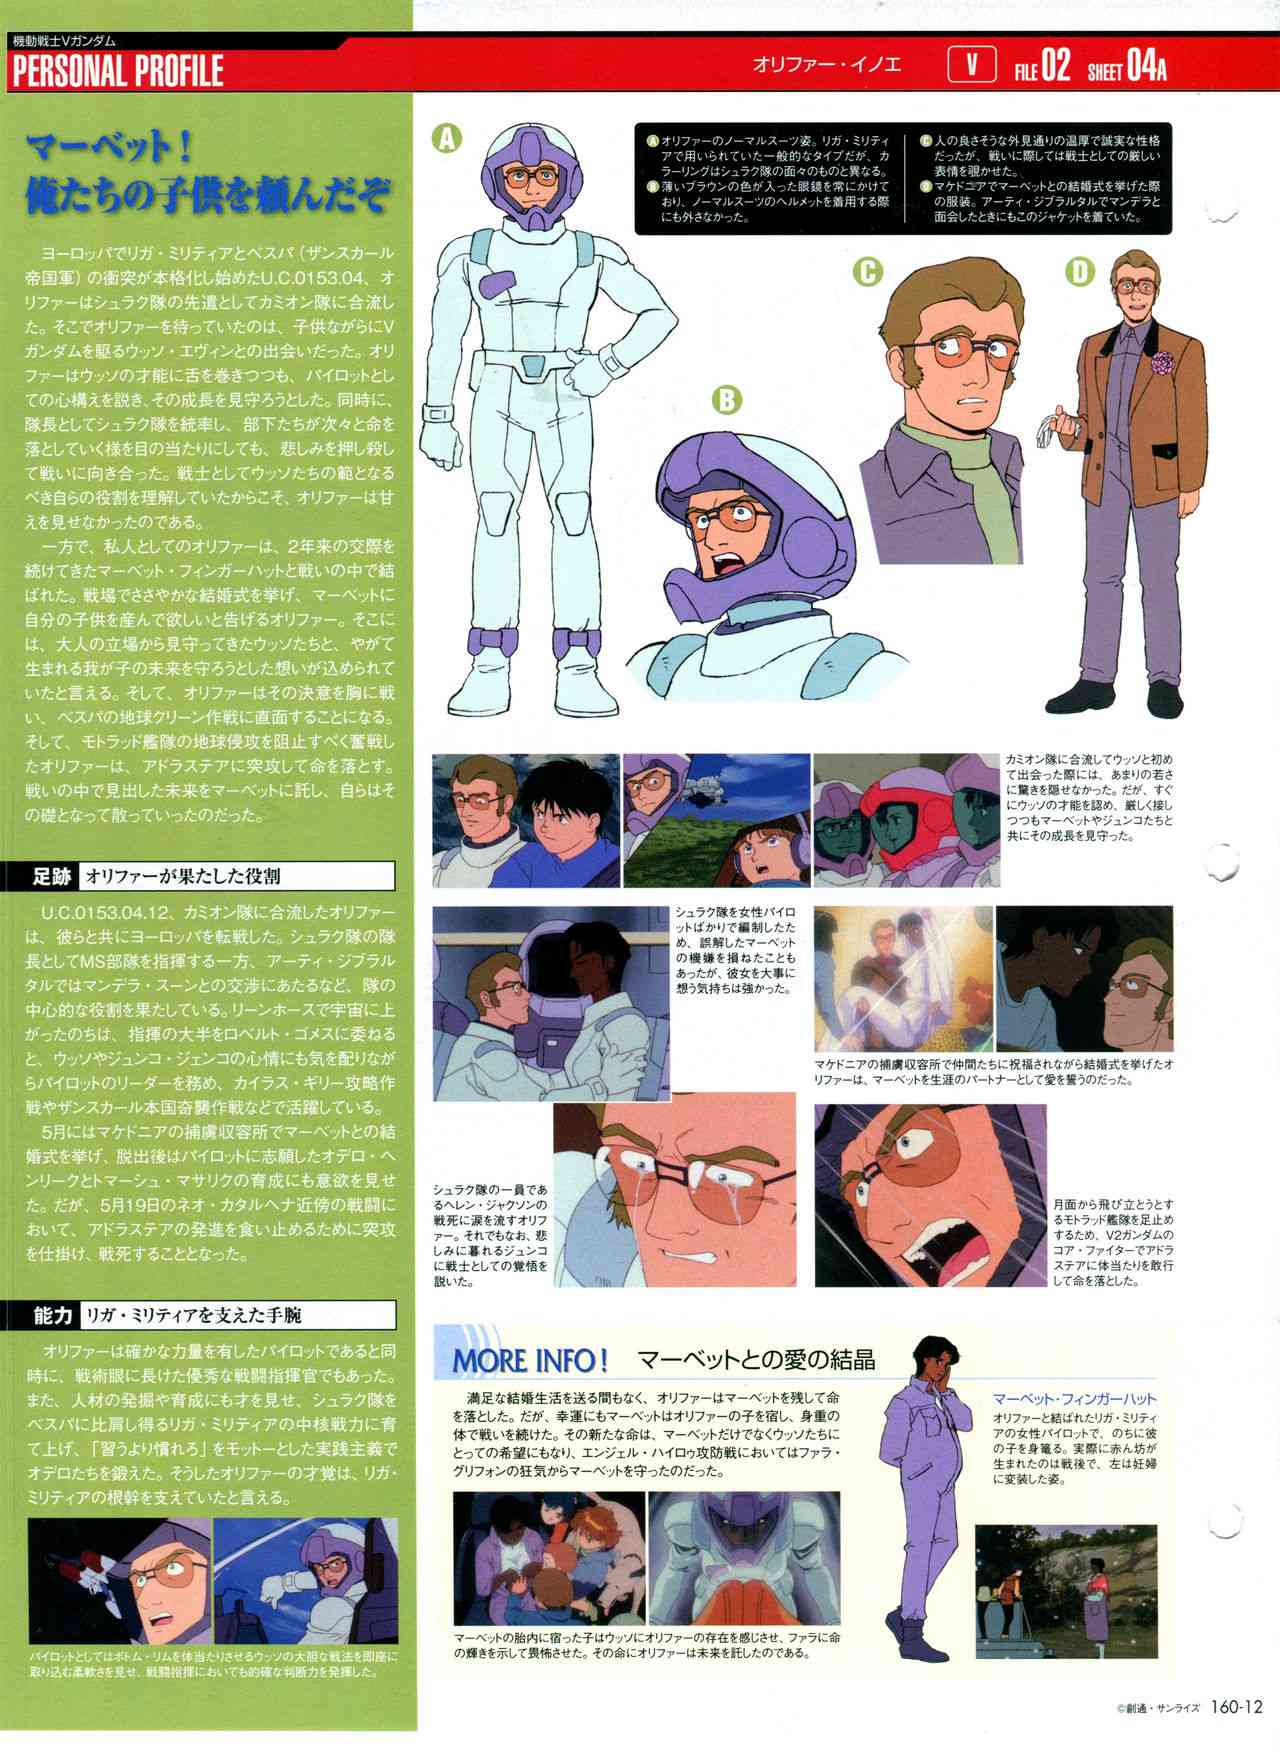 The Official Gundam Perfect File  - 160話 - 4